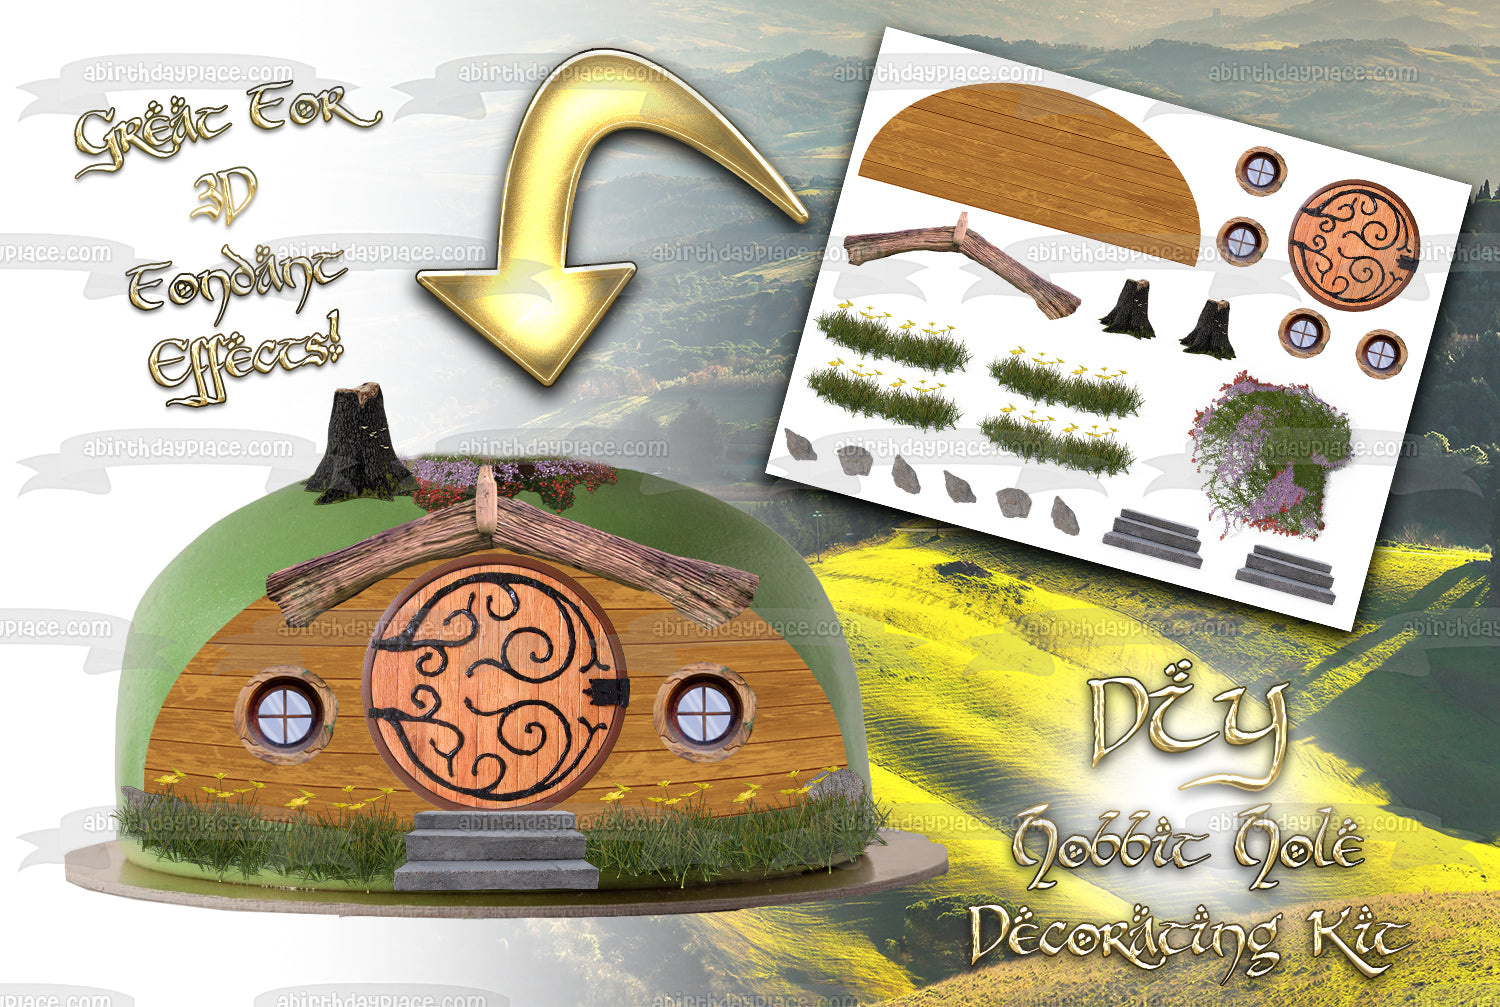 Hobbit Hole Decorating Kit Edible Cake Topper Image ABPID56780 – A Birthday  Place